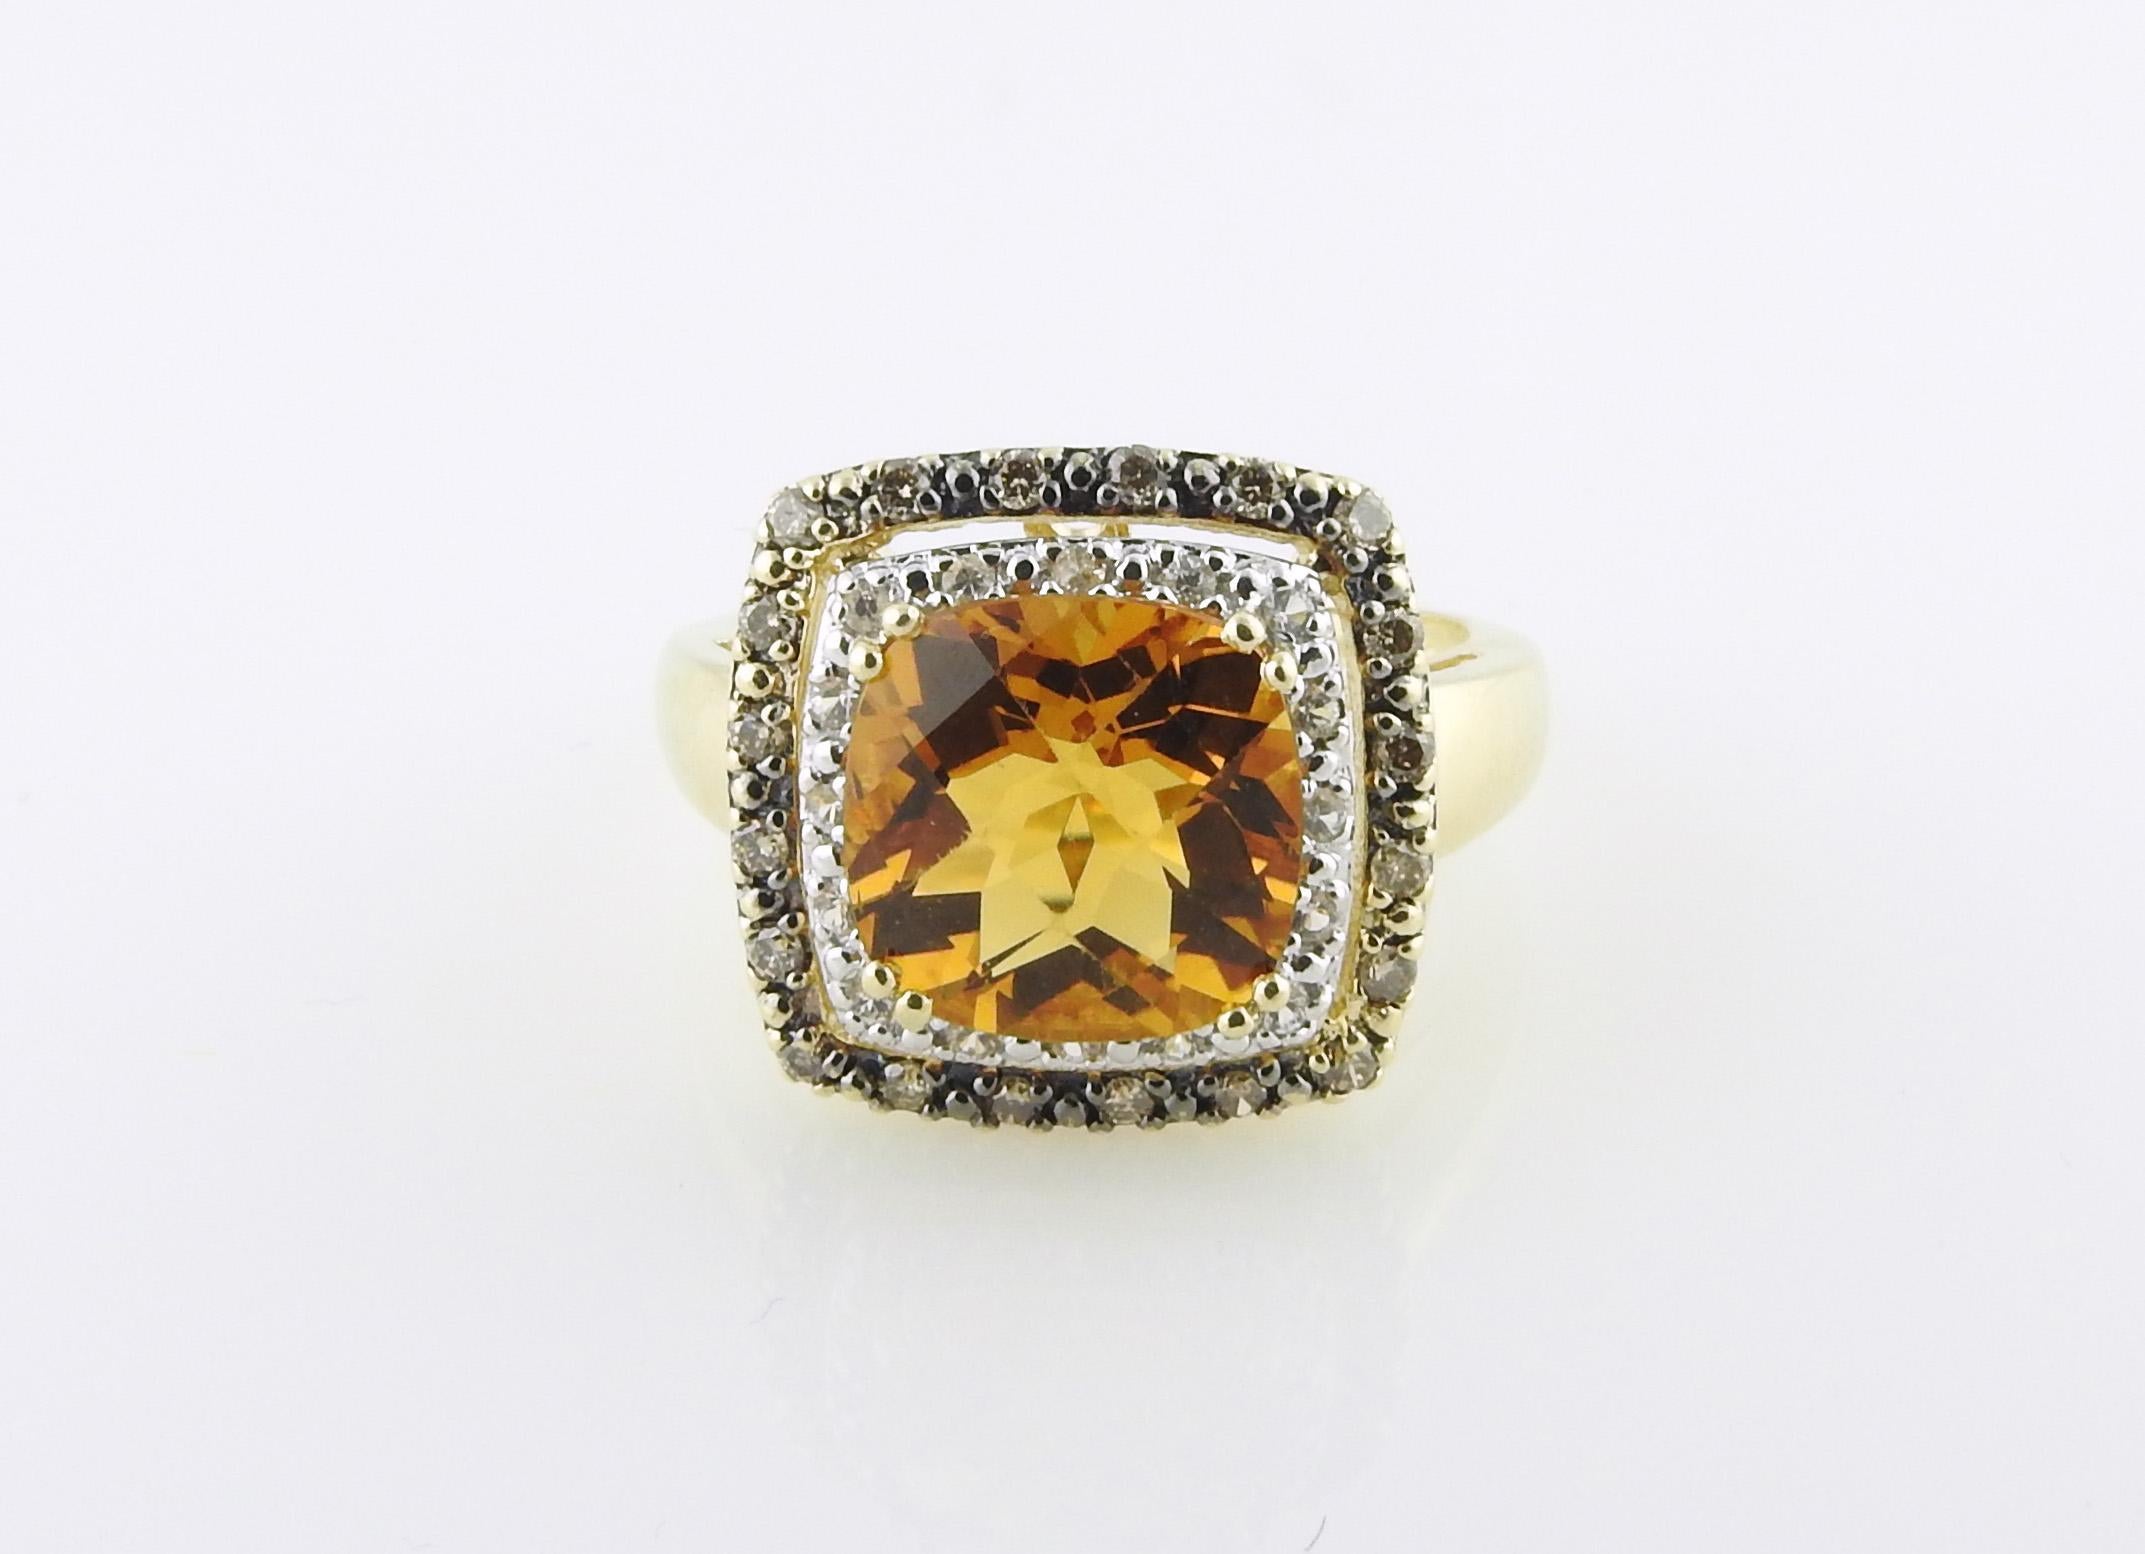 LeVian 14K Yellow Gold Cinnamon Citrine Halo Ring

This stunning LeVian ring is set in 14K yellow gold.

Center faceted Cinnamon Citrine stone is approx. 10mm x 10mm

The citrine is surrounded by a halo of white sapphires.

The outer halo is set